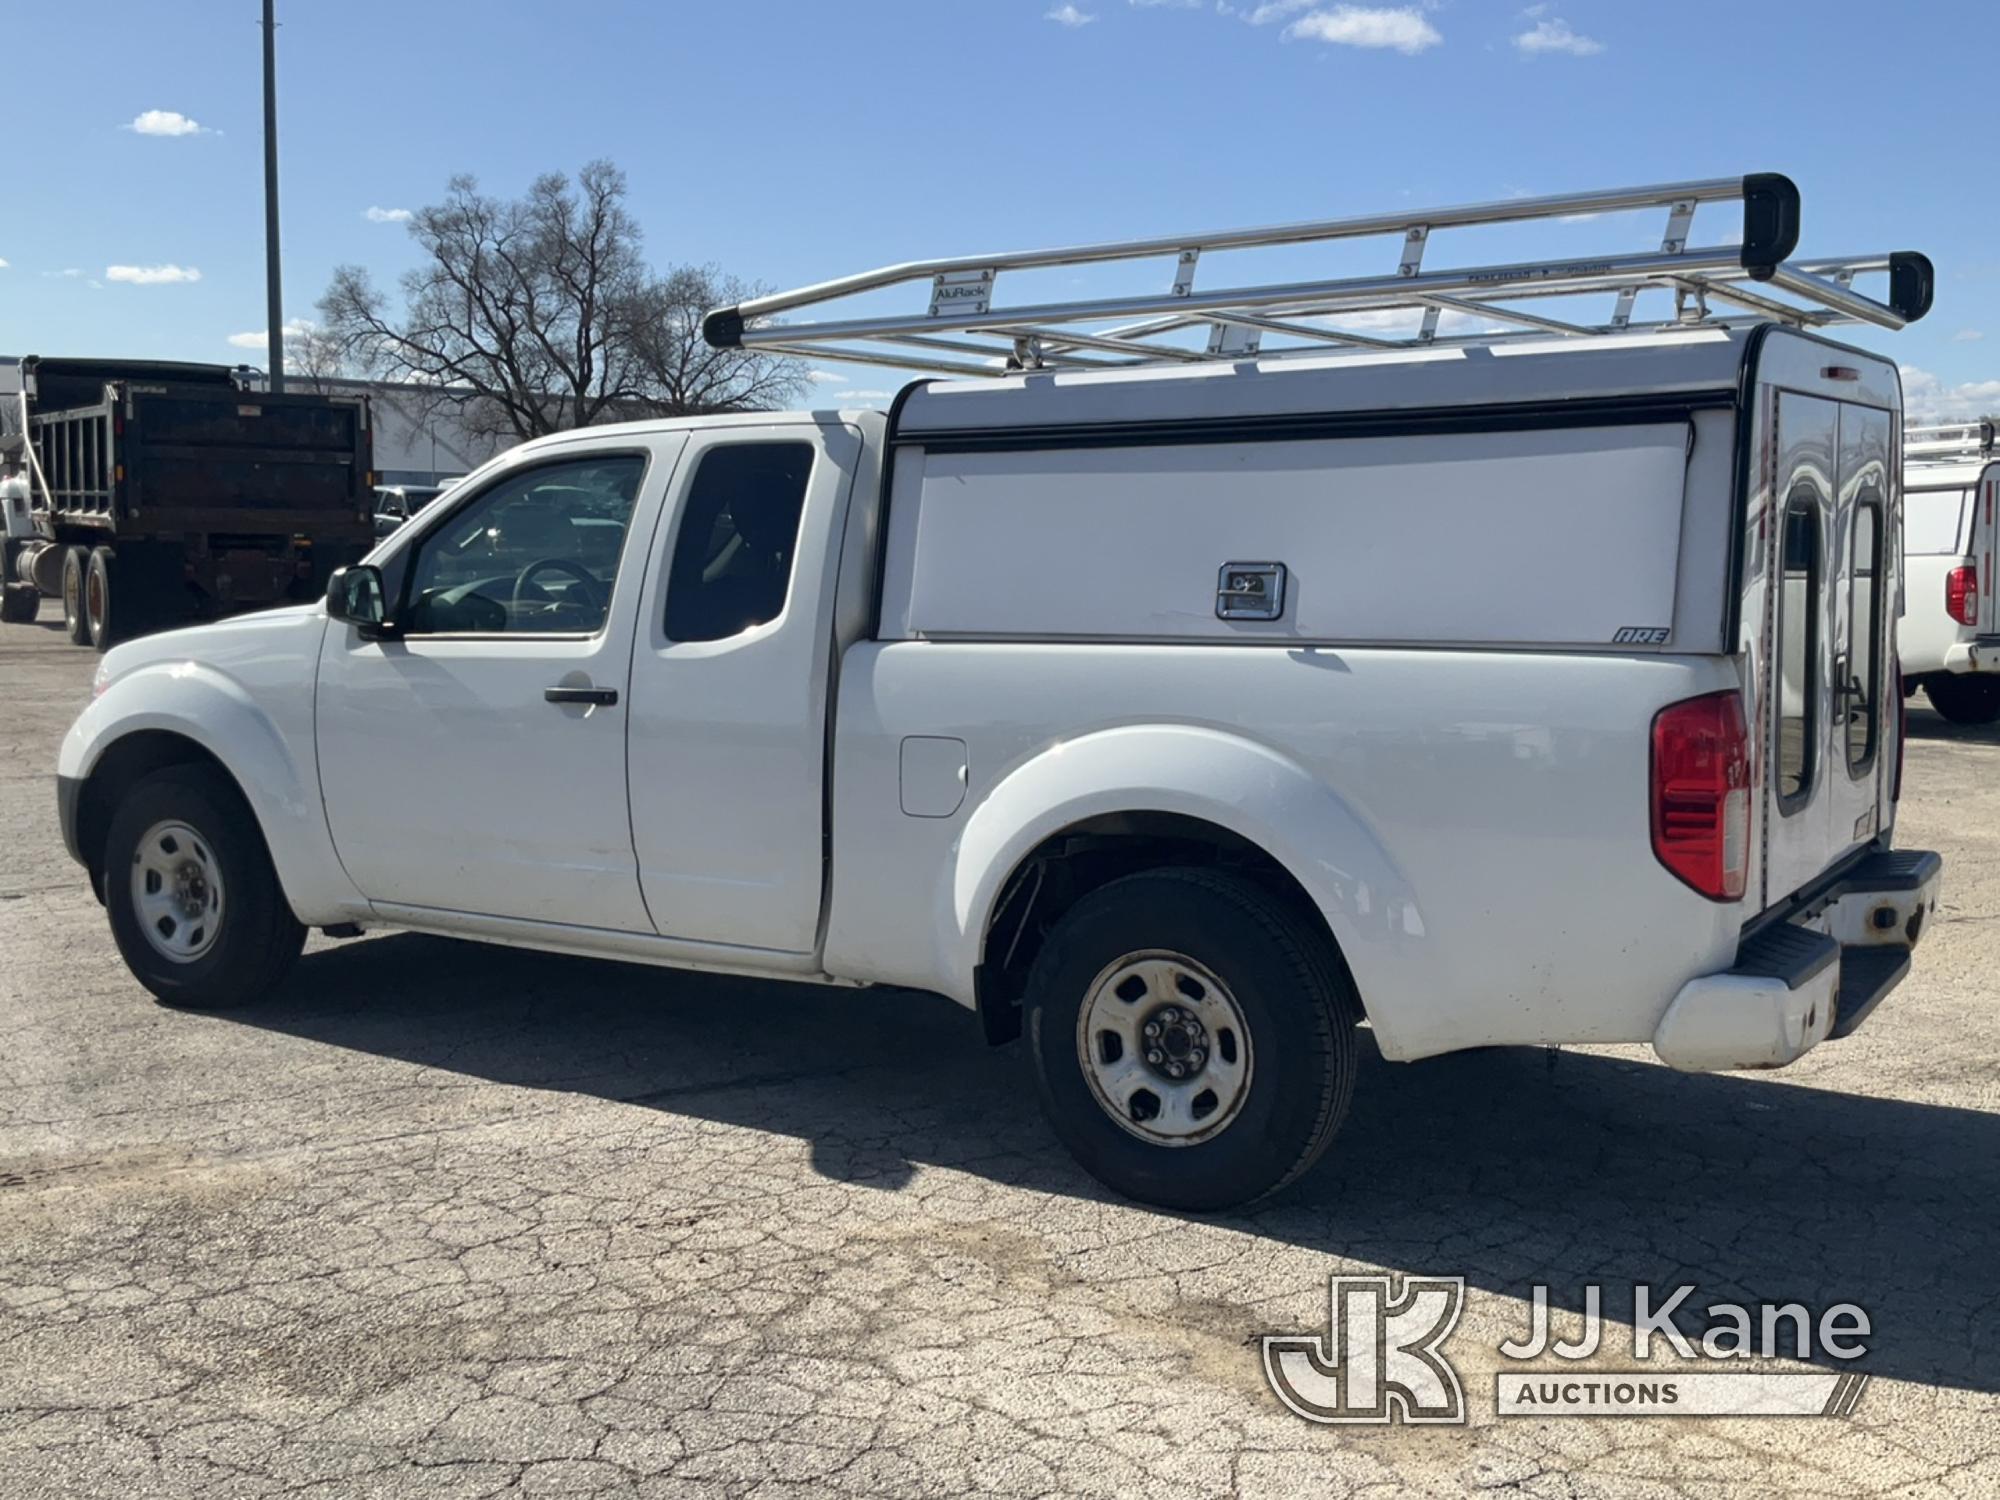 (South Beloit, IL) 2017 Nissan Frontier Extended-Cab Pickup Truck Runs, Moves, Paint Damage